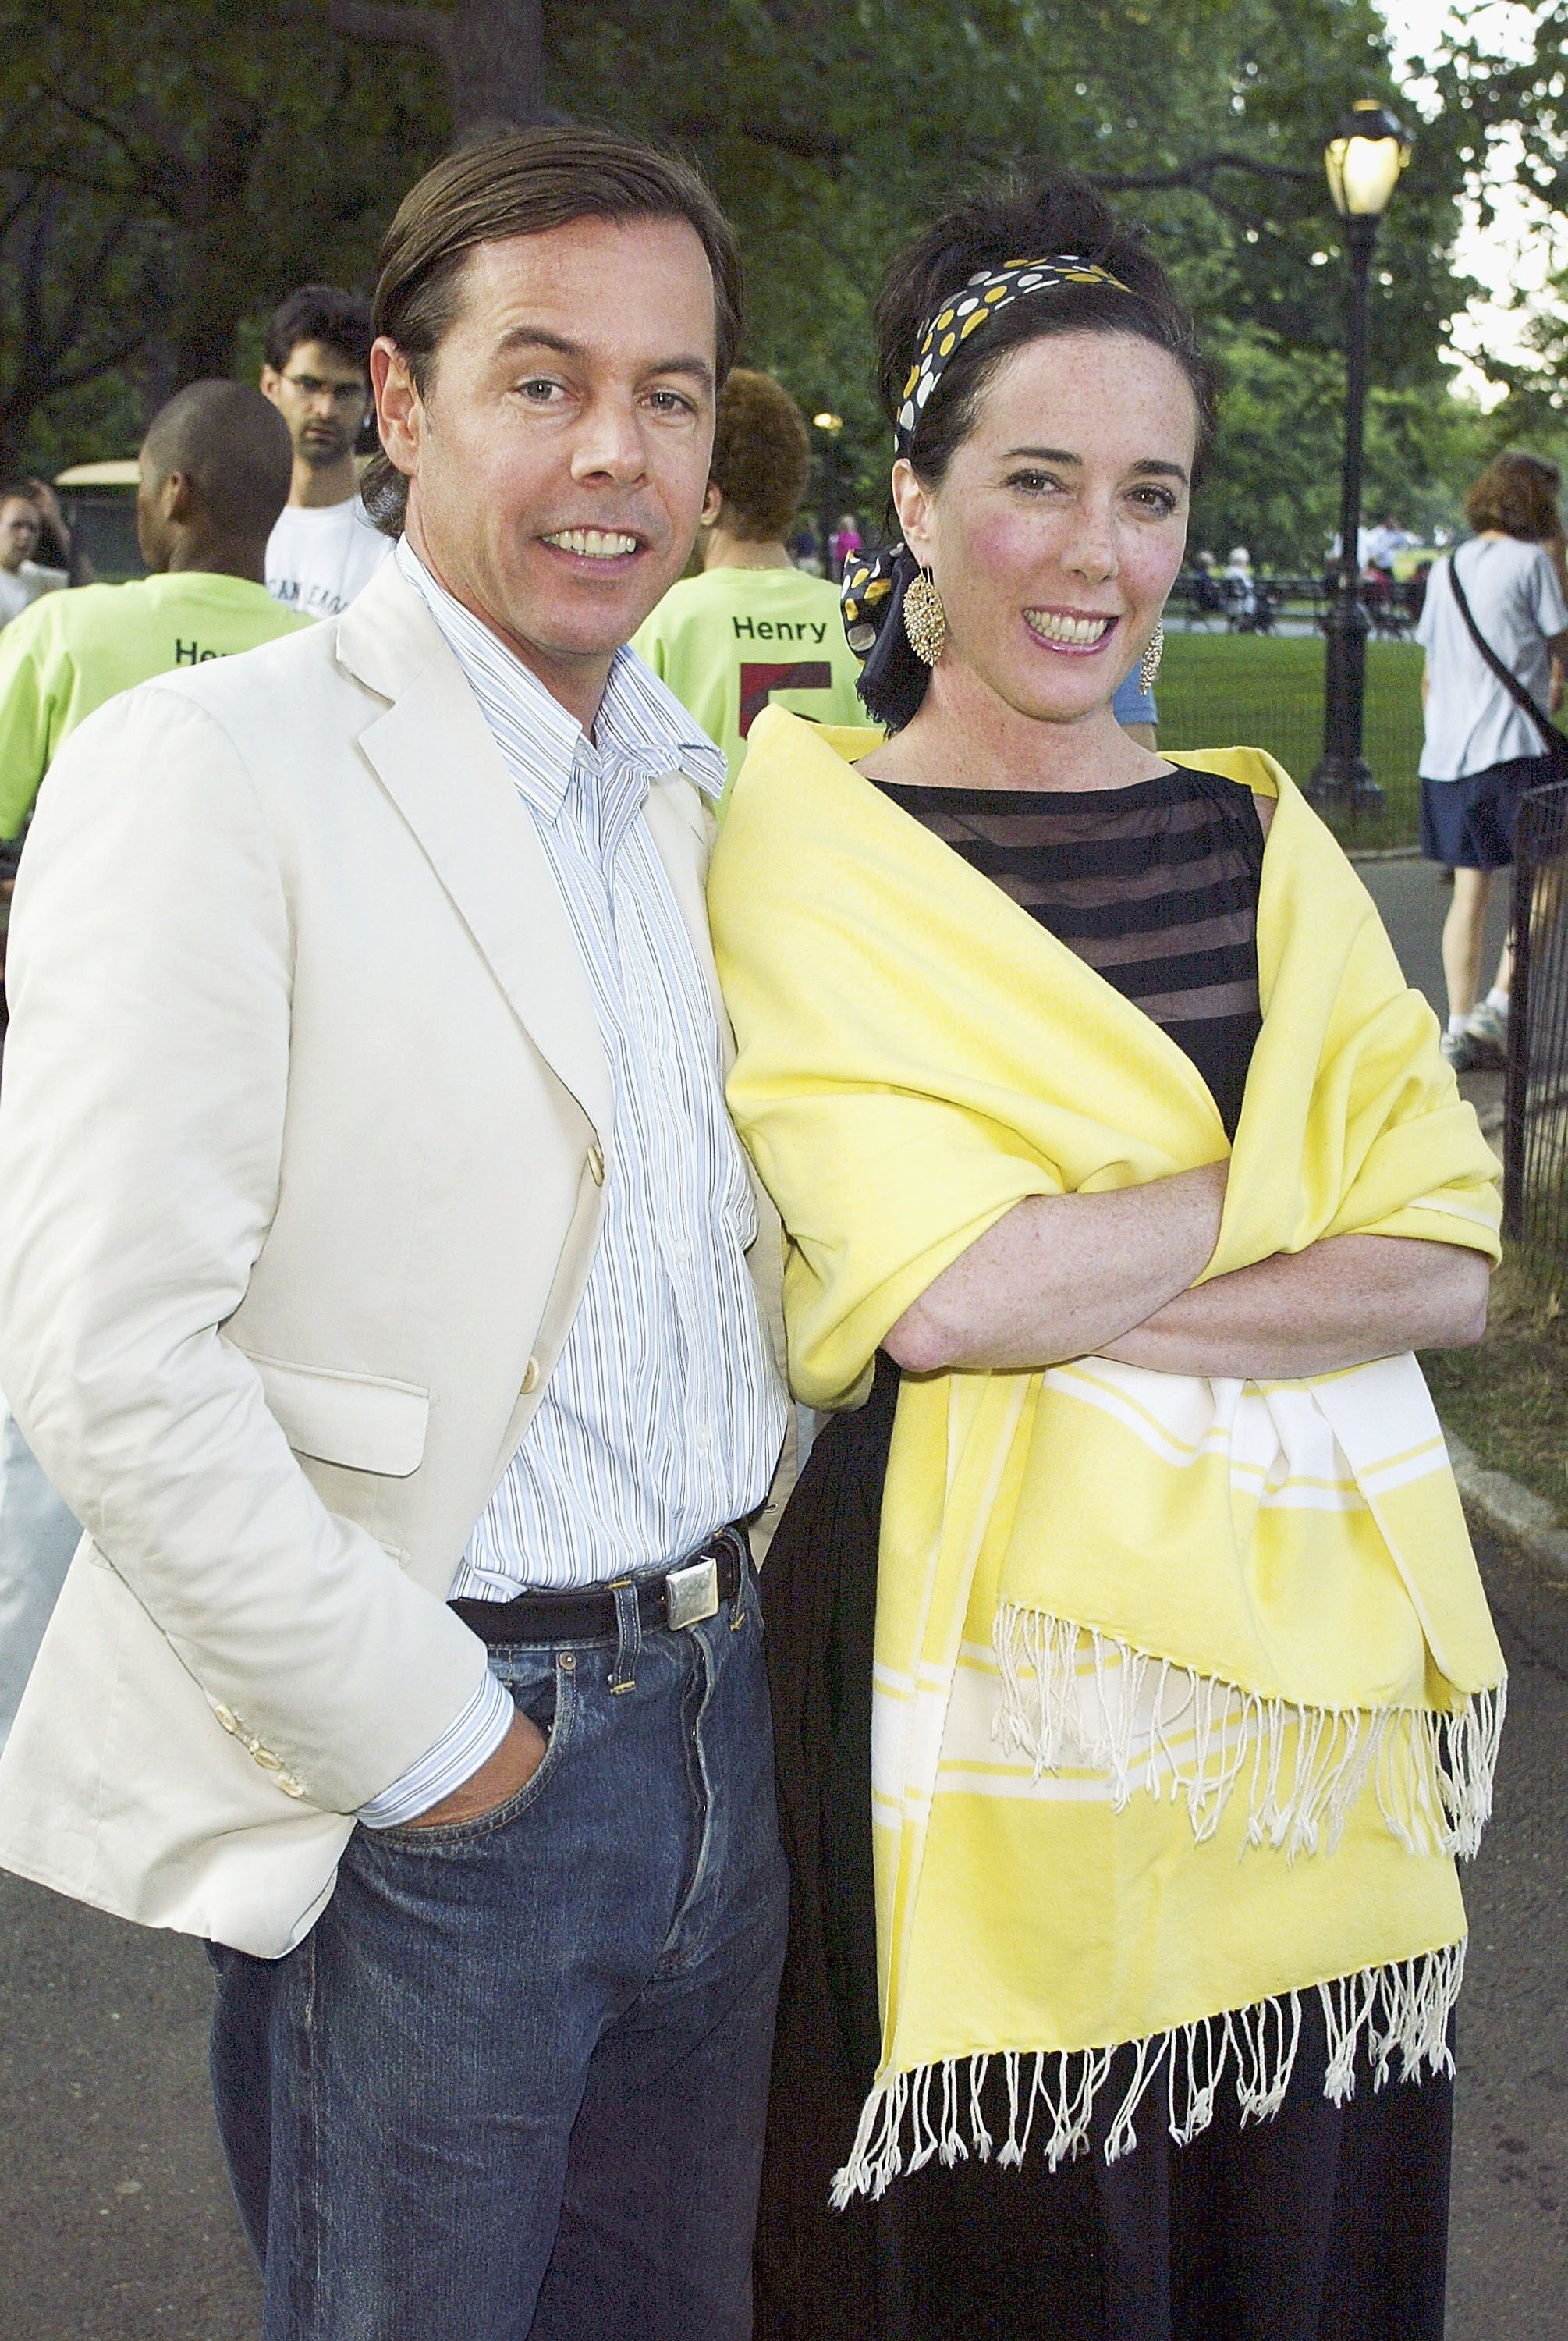 Kate Spade and Andy Spade's Love Story - Facts About Kate's Family and  Daughter Frances Beatrix Spade